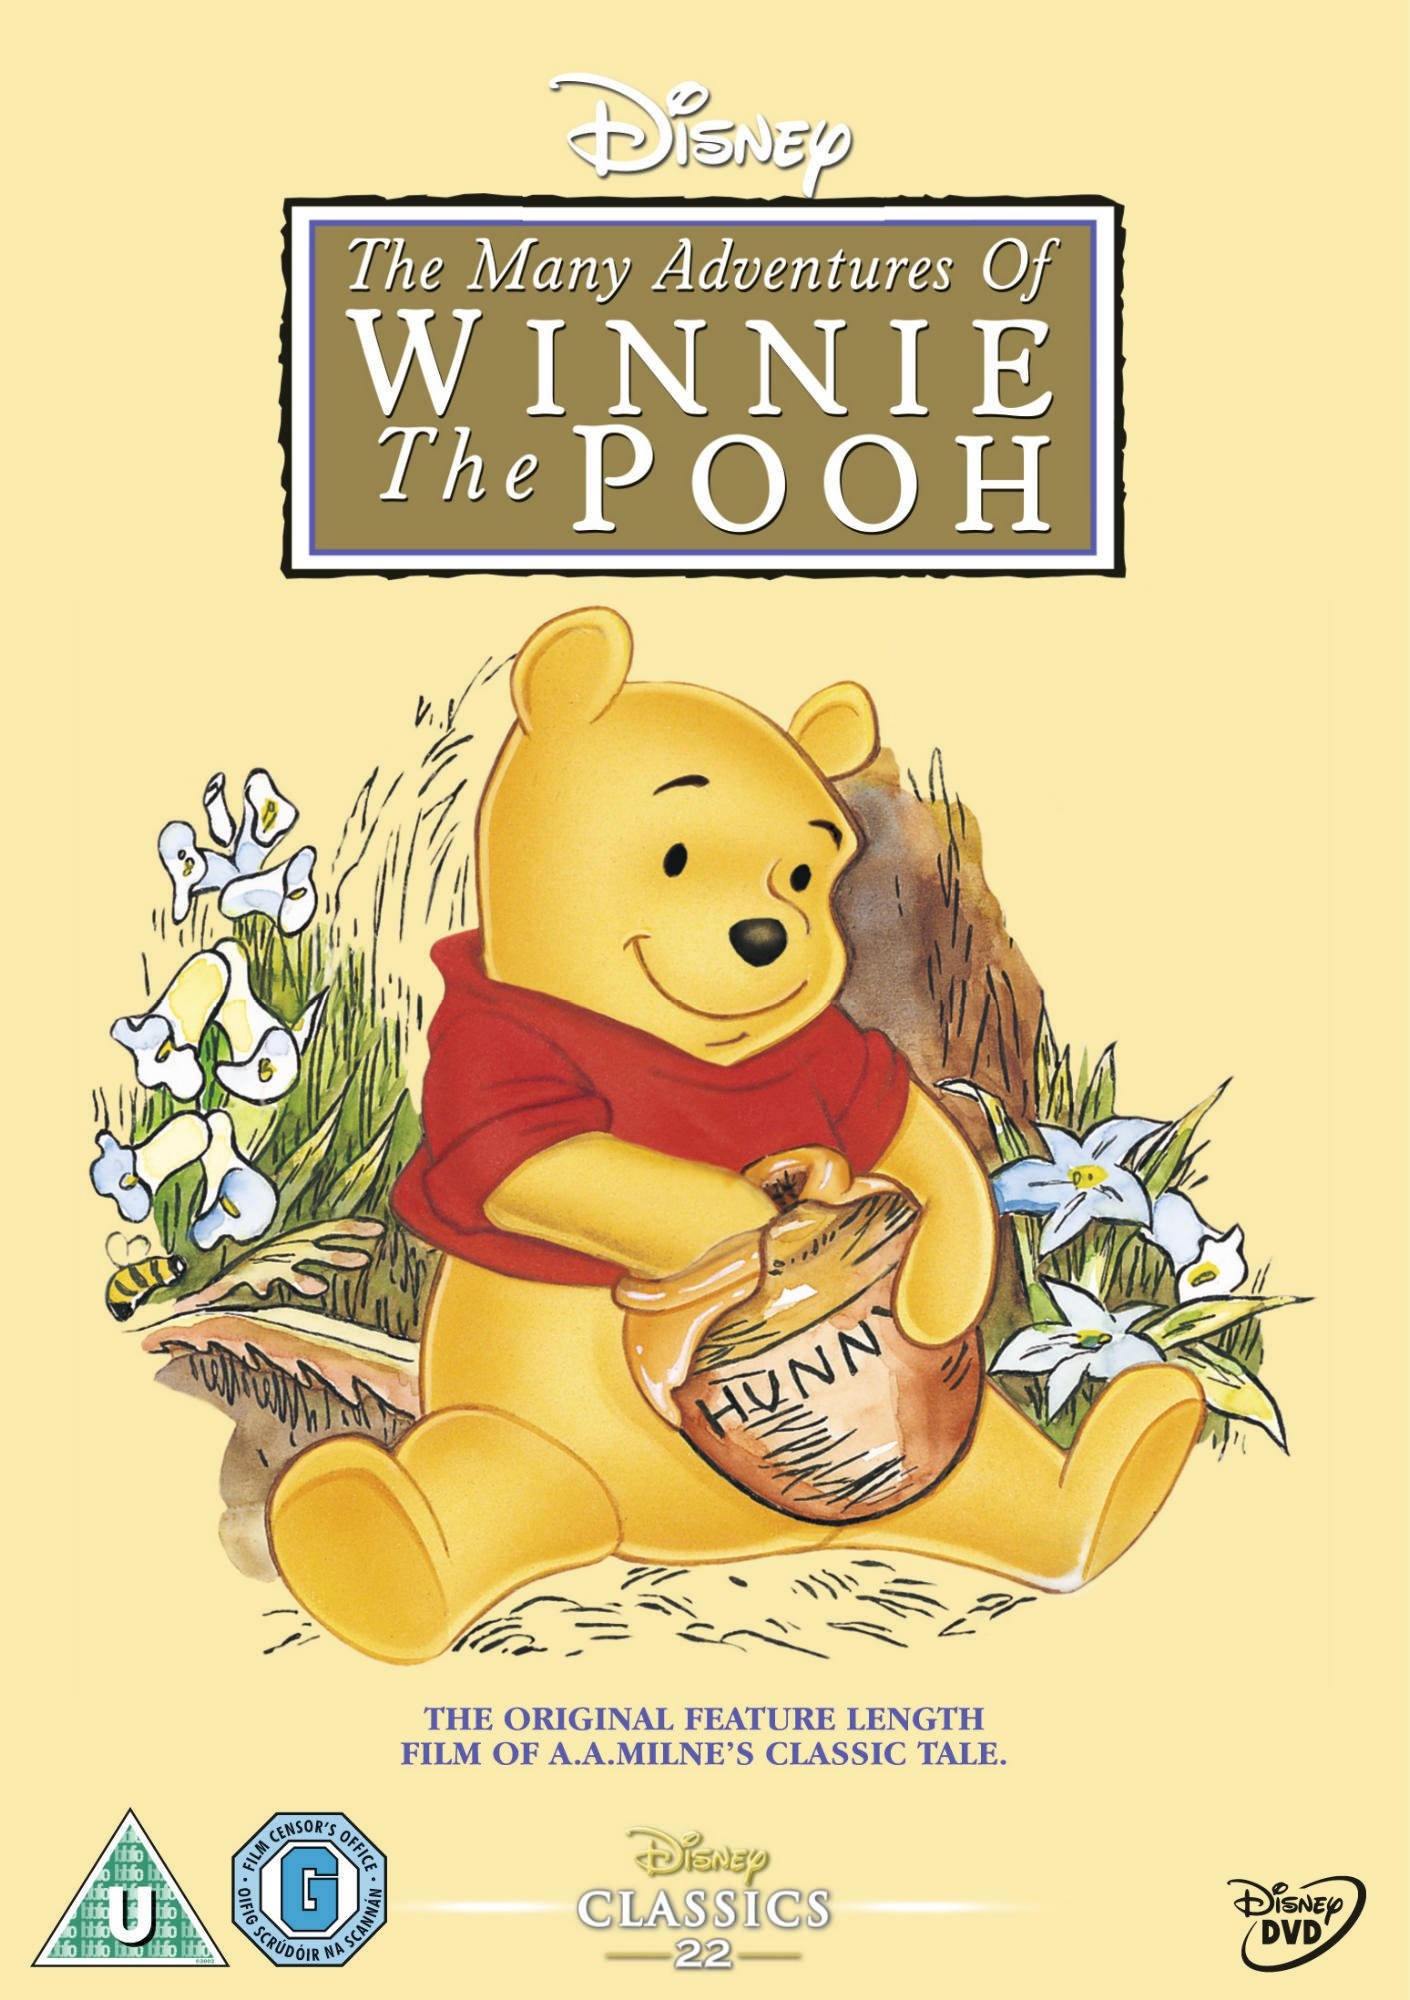 Winnie The Pooh - The Many Adventures of Winnie The Pooh [UK Import]